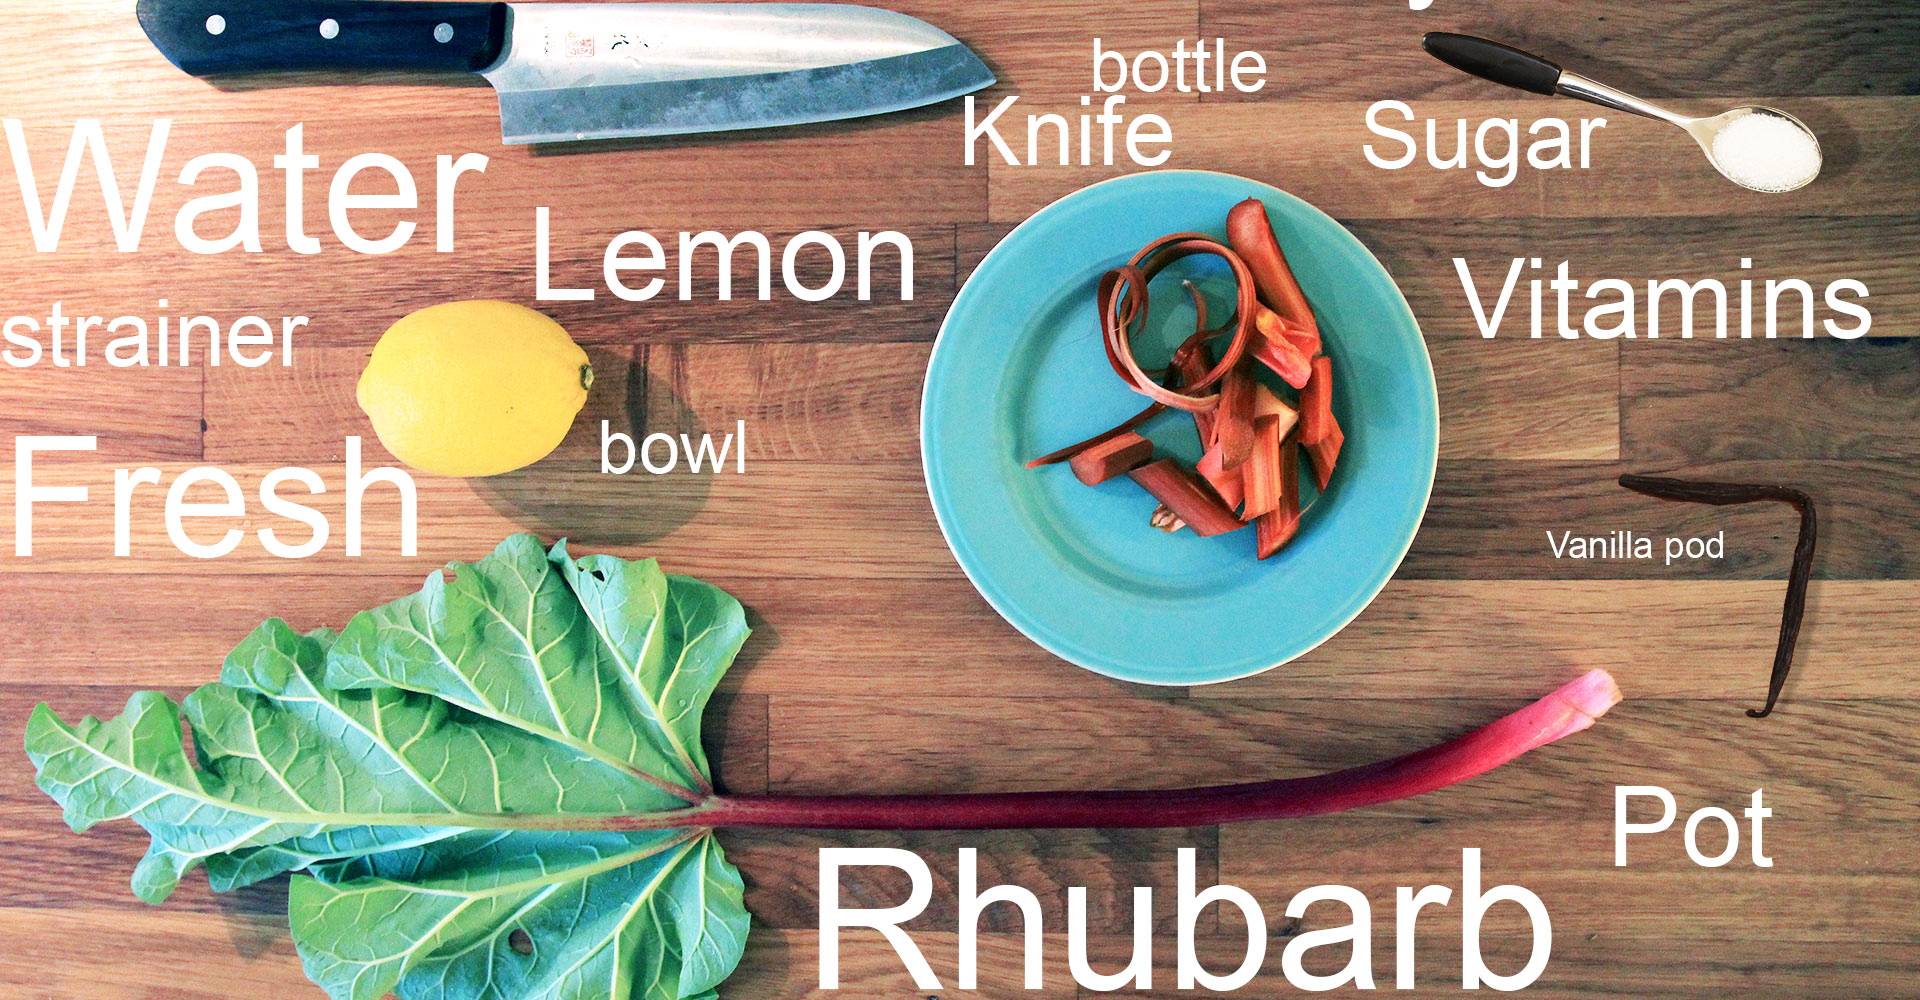 Rhubarb Juice poster with text and ingredients